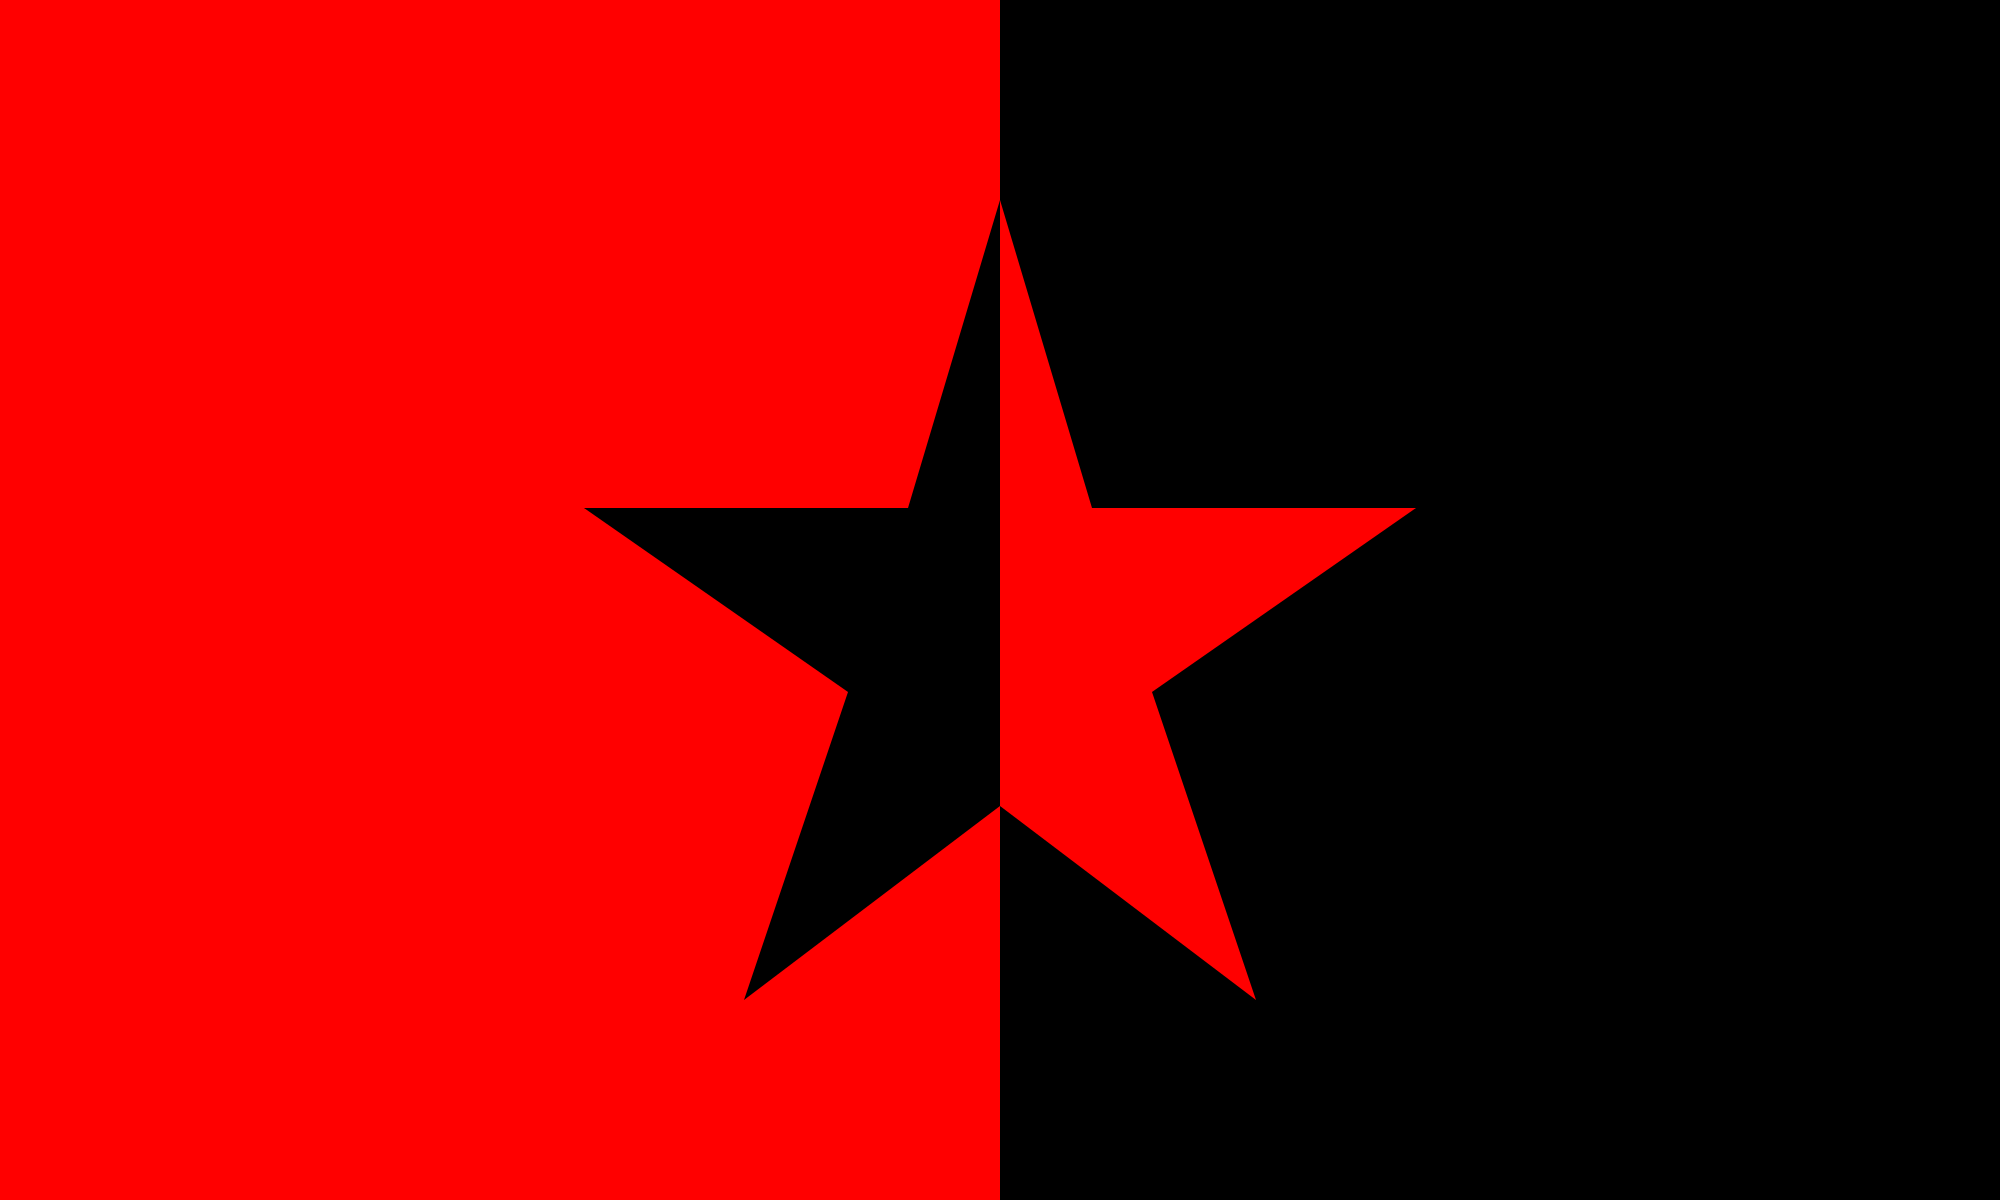 Black and Red Color Logo - File:Red black star flag.svg - Wikimedia Commons